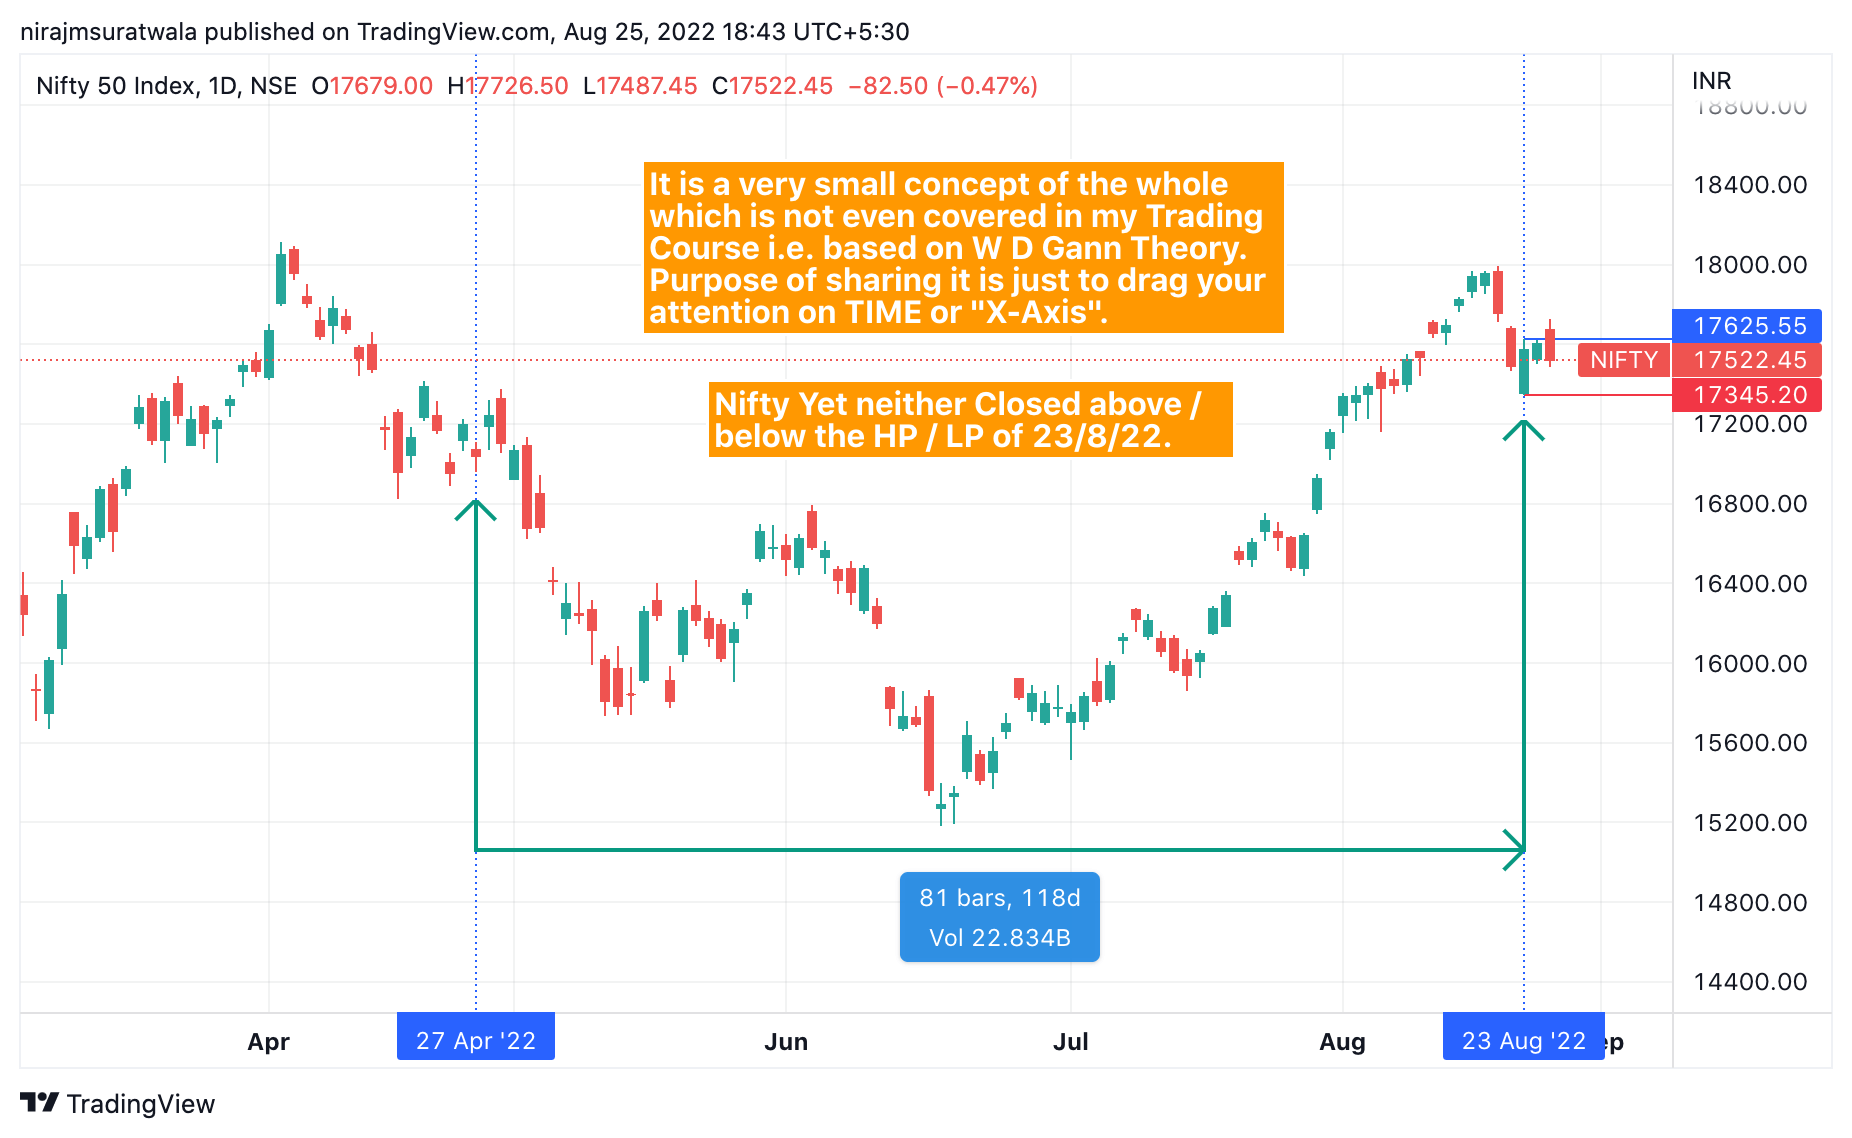 How to trade in nifty 50 is Explained & nifty outlook 23/8/22 Onwards.